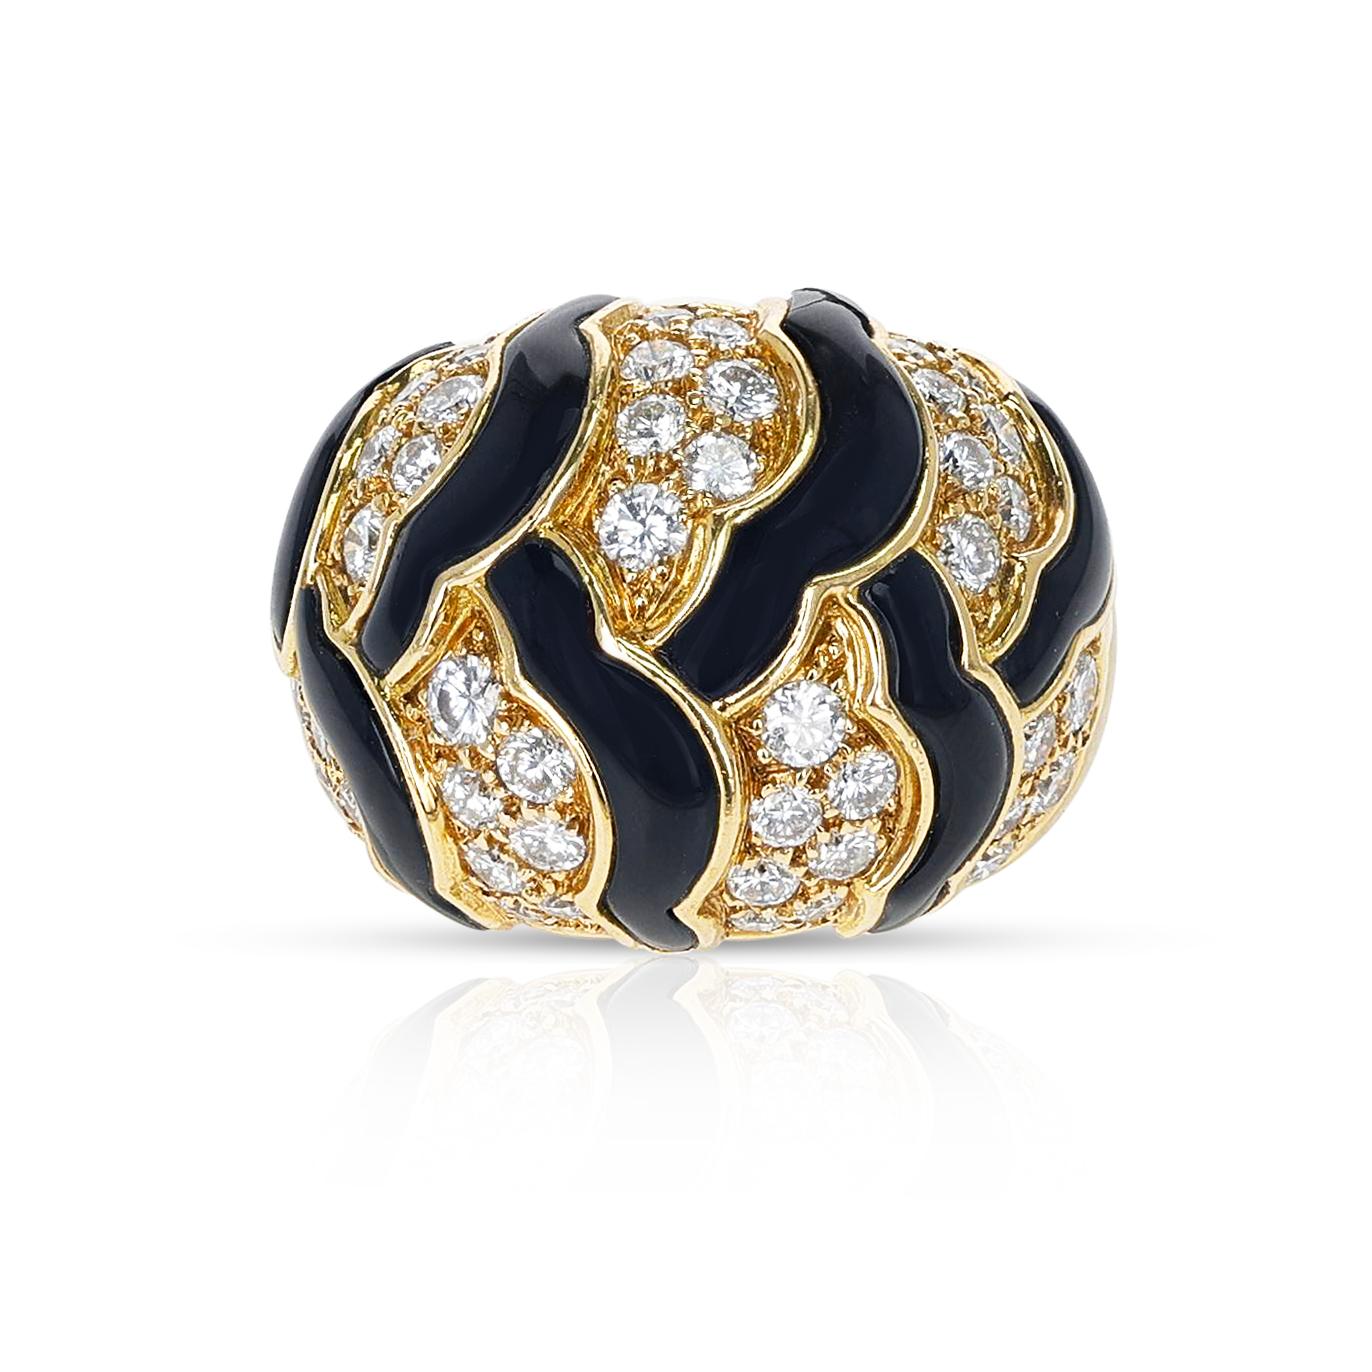 A bold and beautiful Van Cleef & Arpels Black Onyx and White Diamonds Dome Cocktail Ring made in 18 Karat Yellow Gold. The ring size is US 5.75. The total weight of the ring is 22.04 grams. 